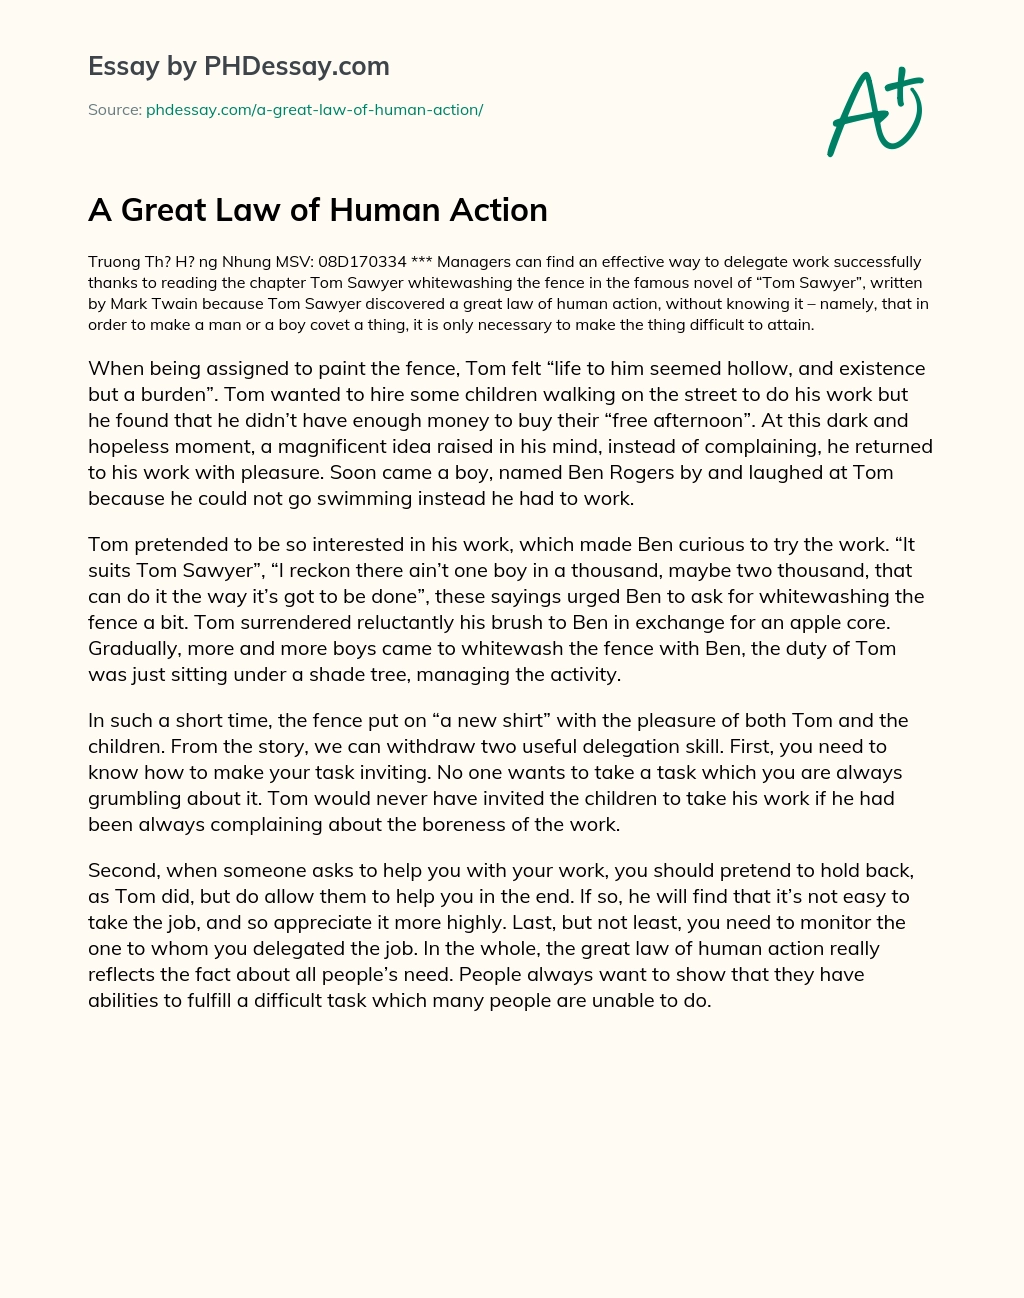 A Great Law of Human Action essay